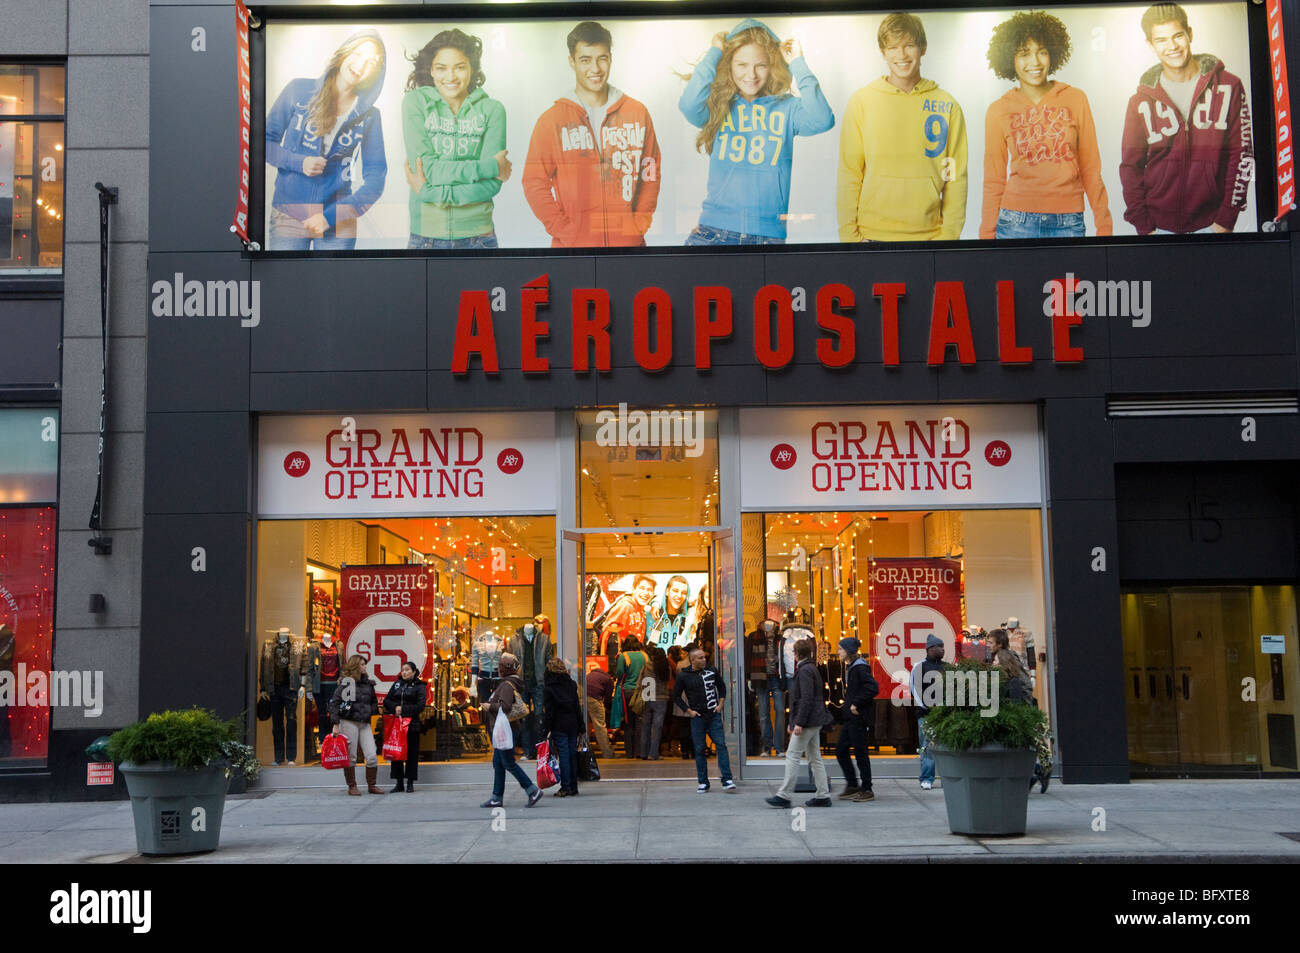 Grand Opening of an Aeropostale clothing store on 34th Street in